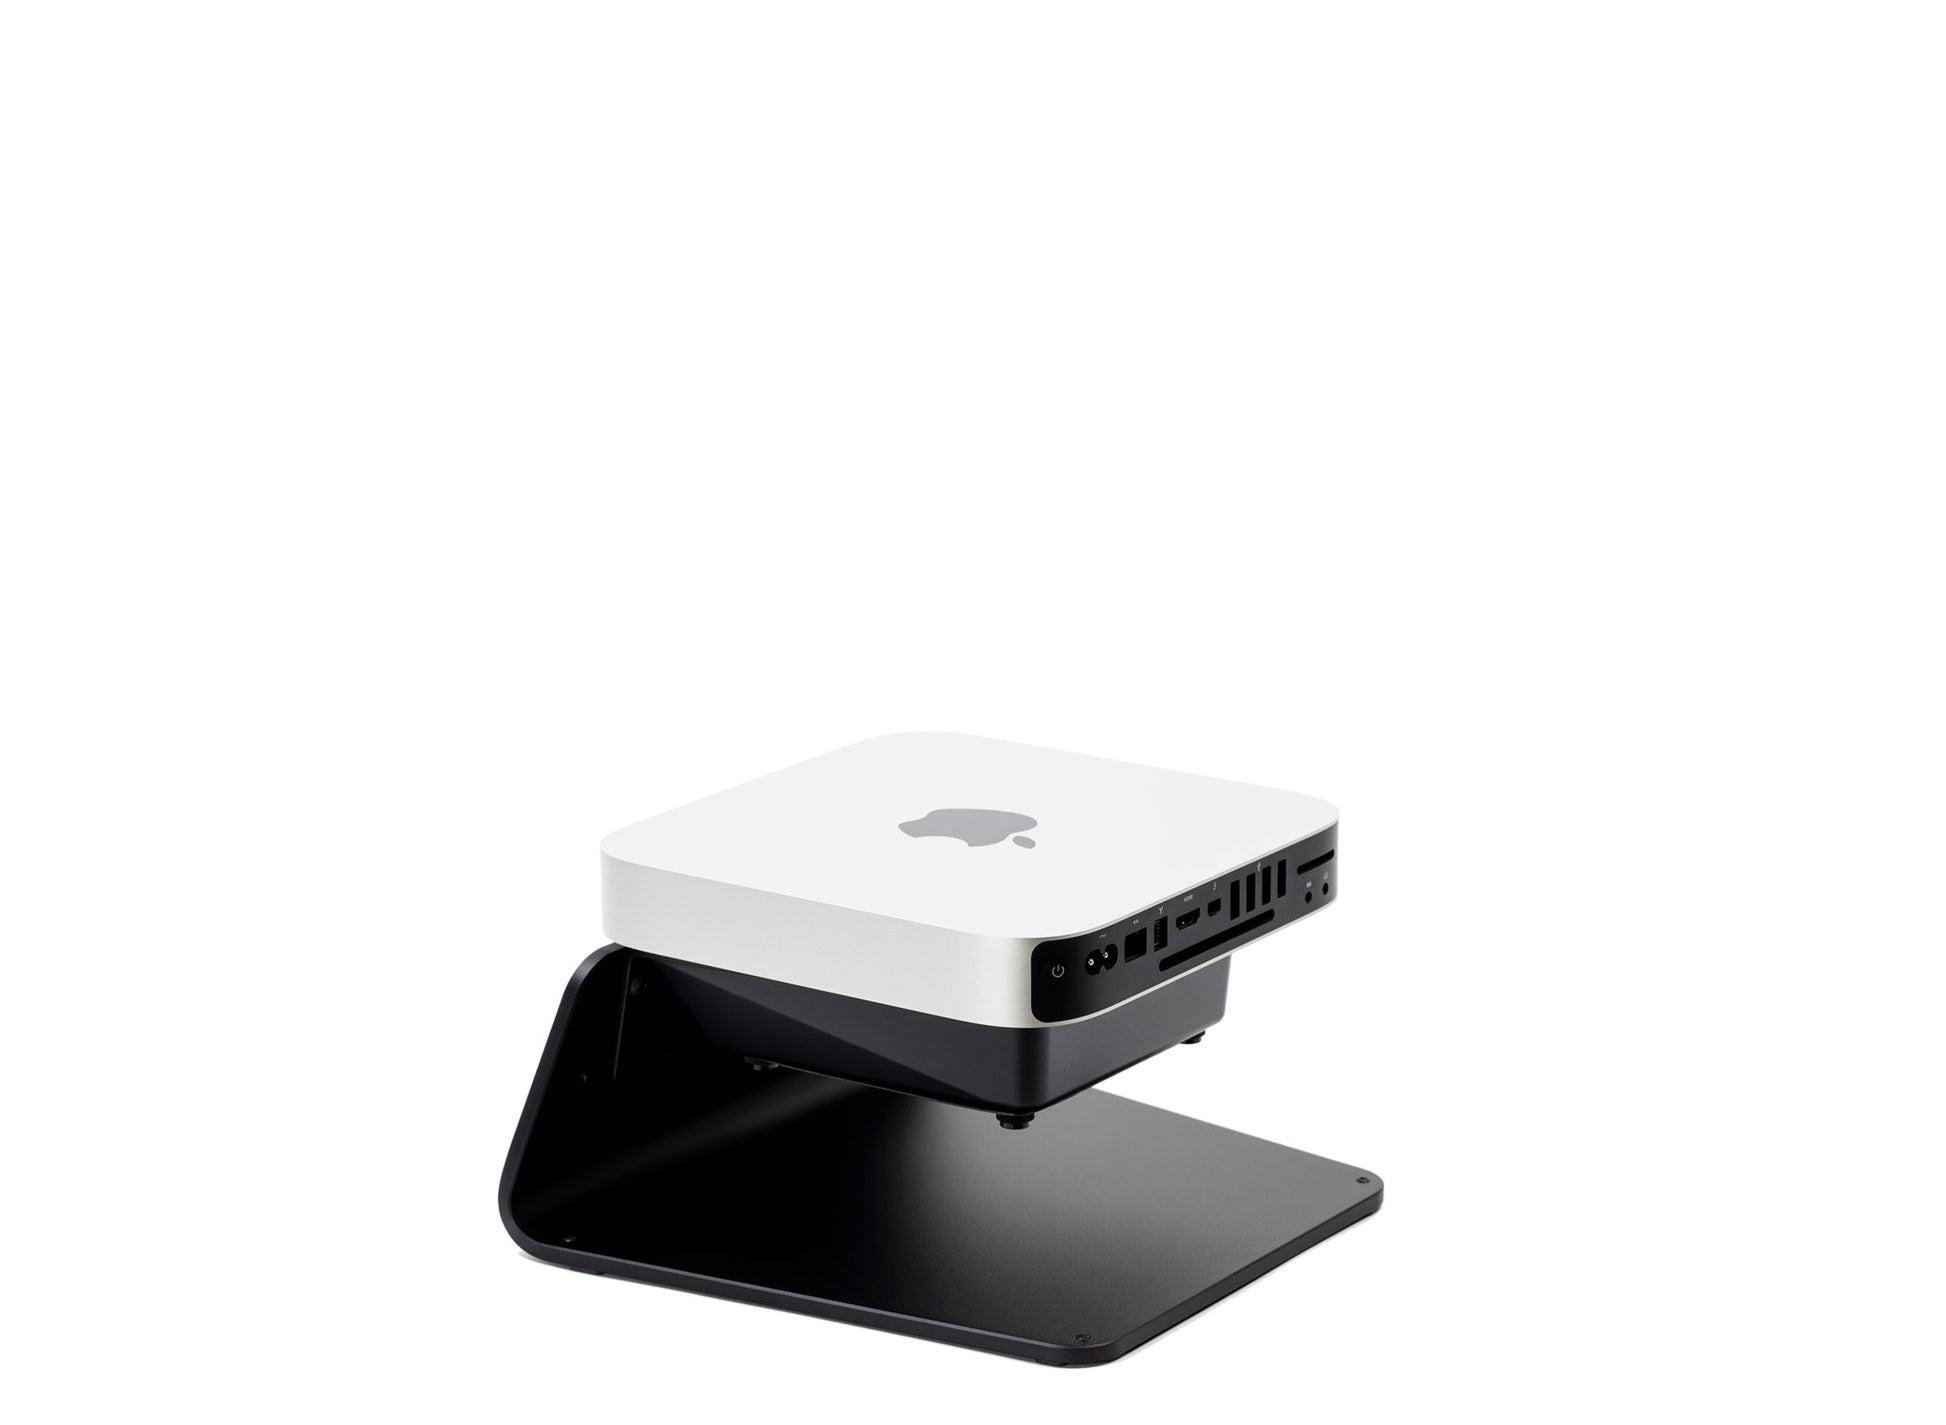 SVALT Cooling Stand model SxB14M black back top side view for quiet fan cooling performance with Apple Mac Mini